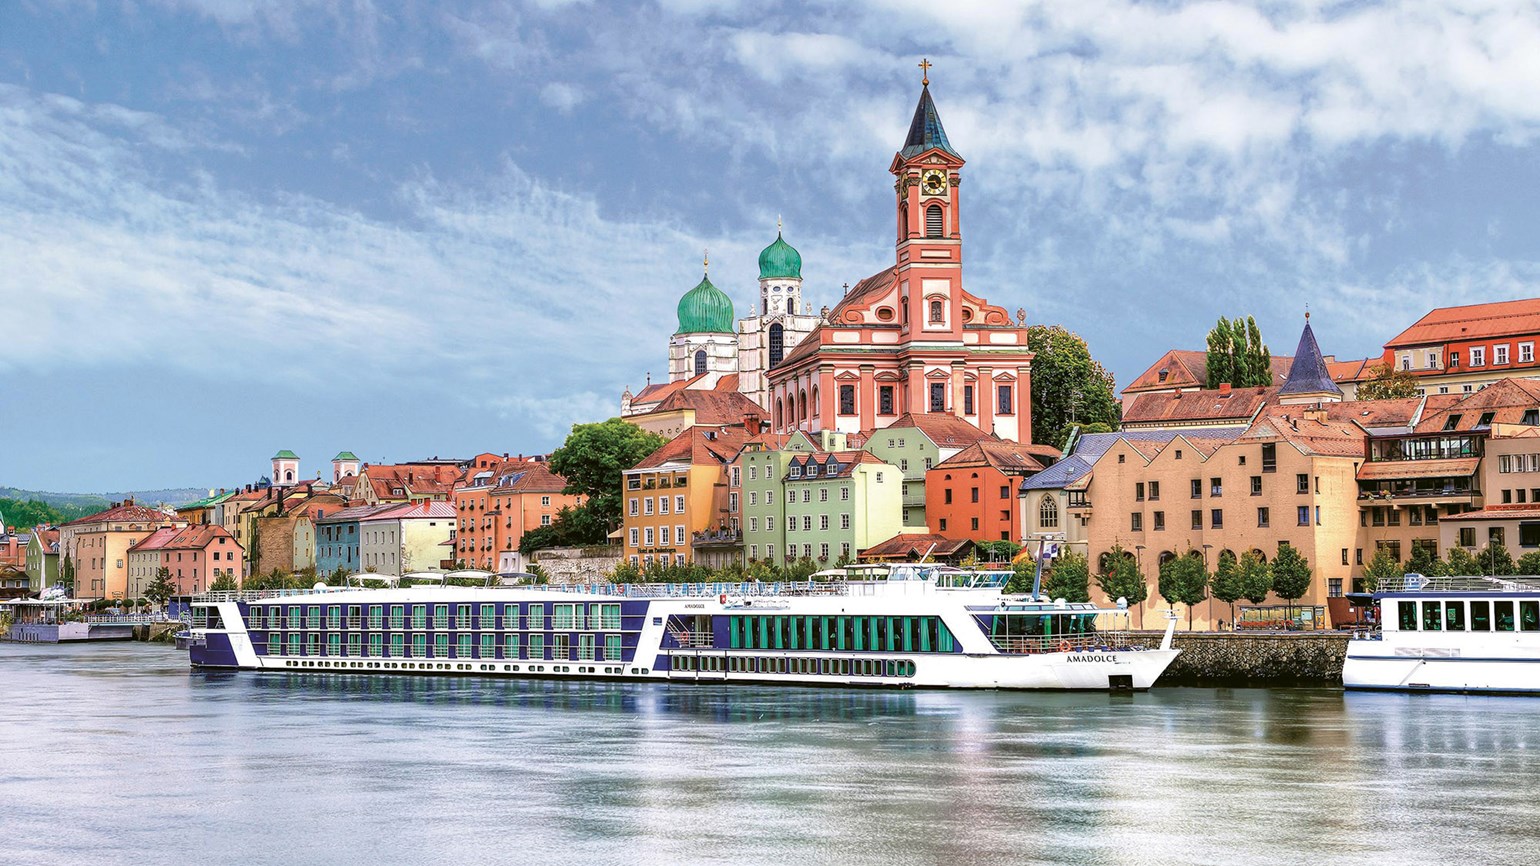 River cruising Google image from http://www.travelweekly.com/River-Cruising/River-cruises-have-options-for-travelers-sailing-solo